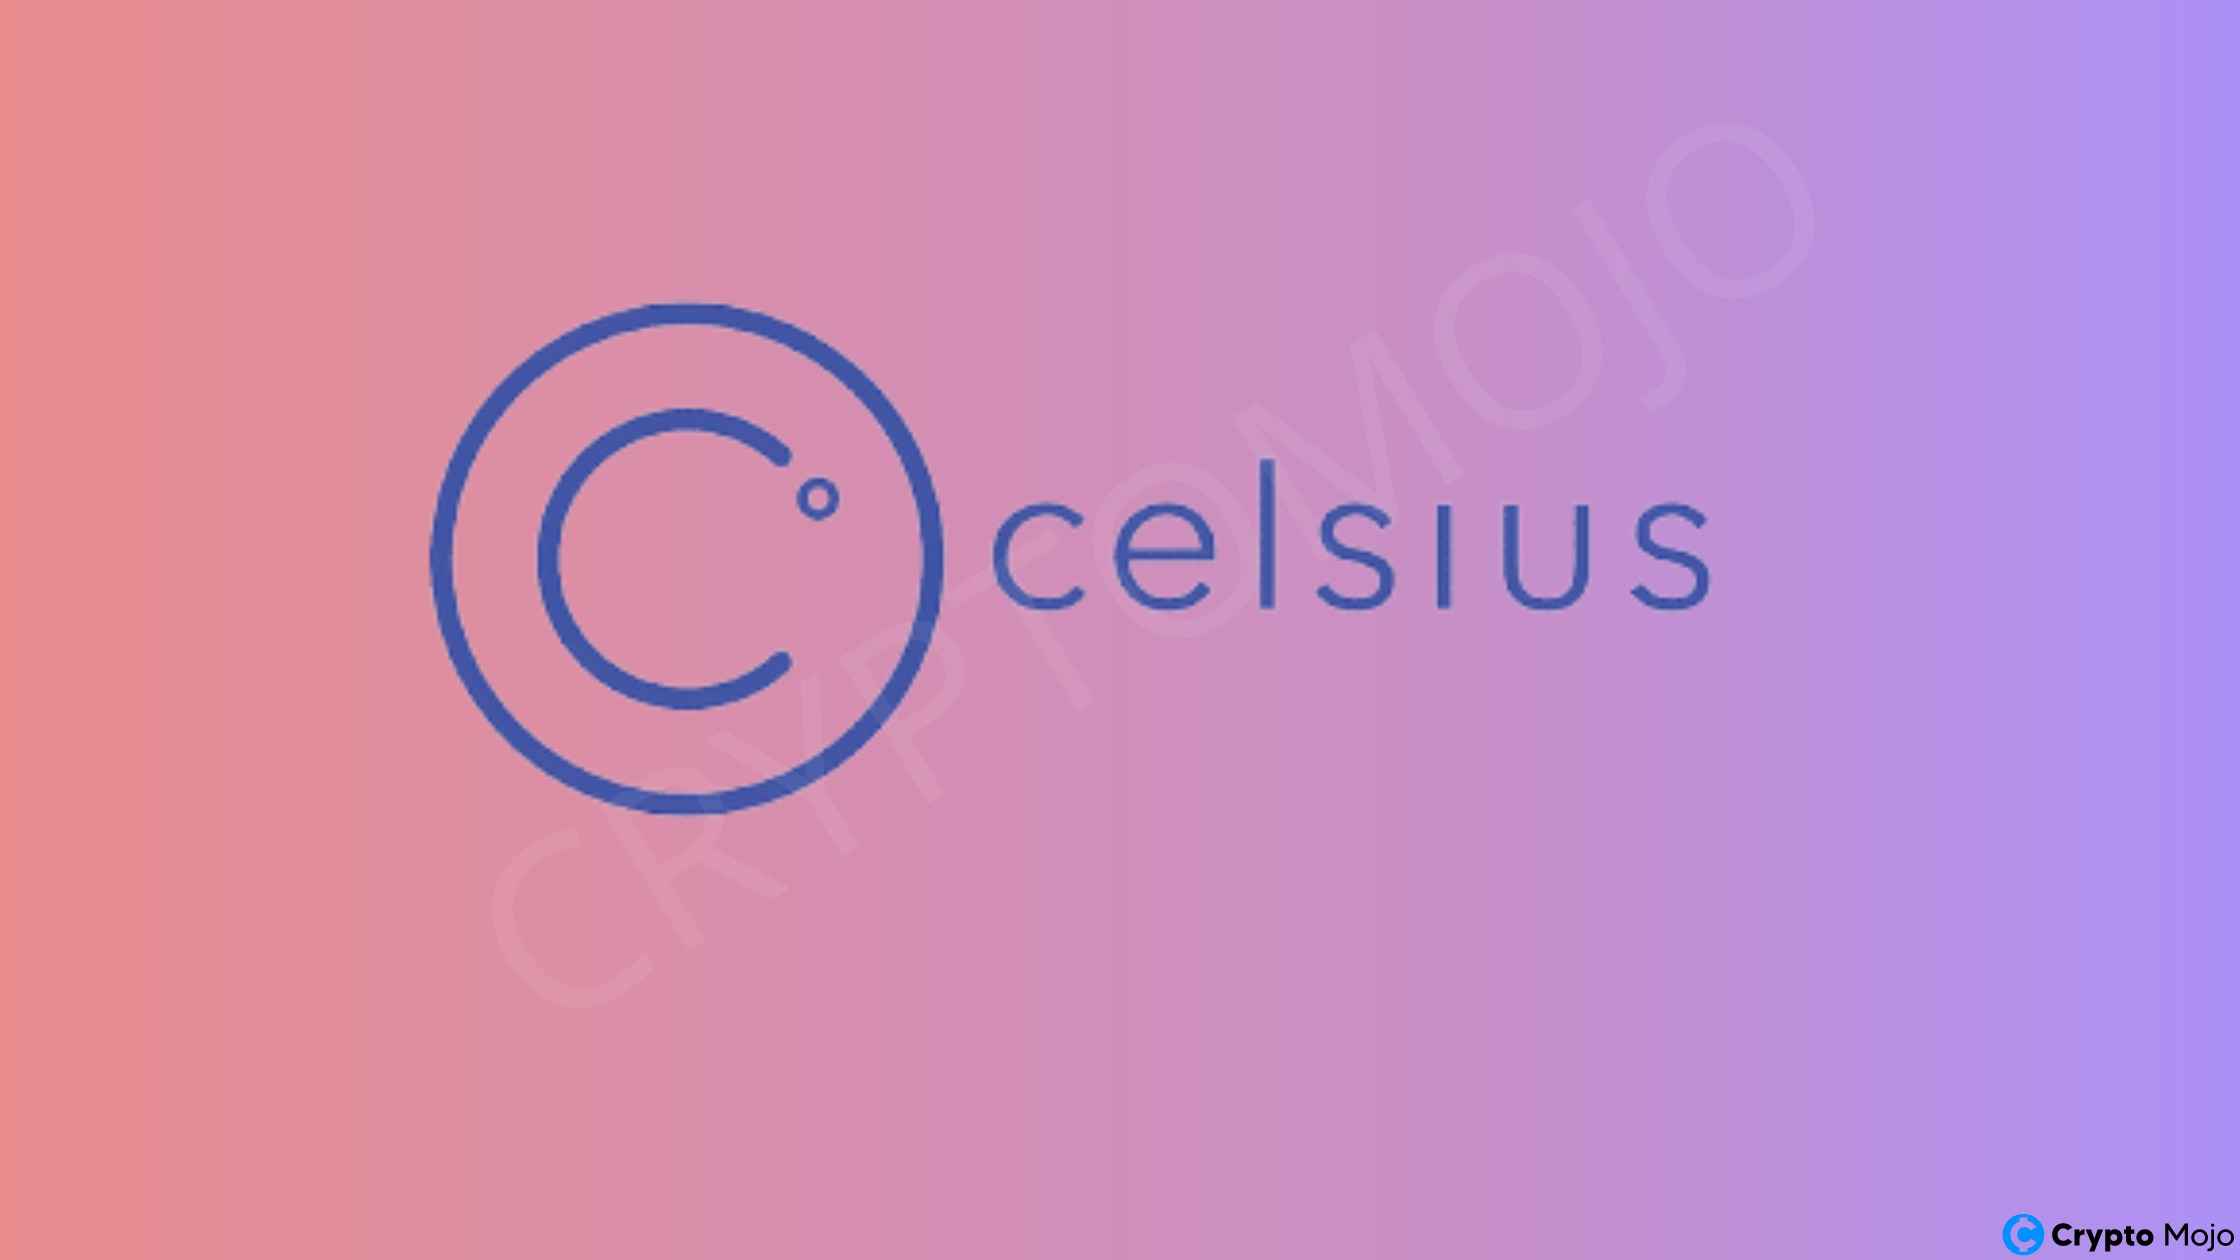 Celsius Creditors Take Action To Stop The Company From Selling Mined Bitcoin